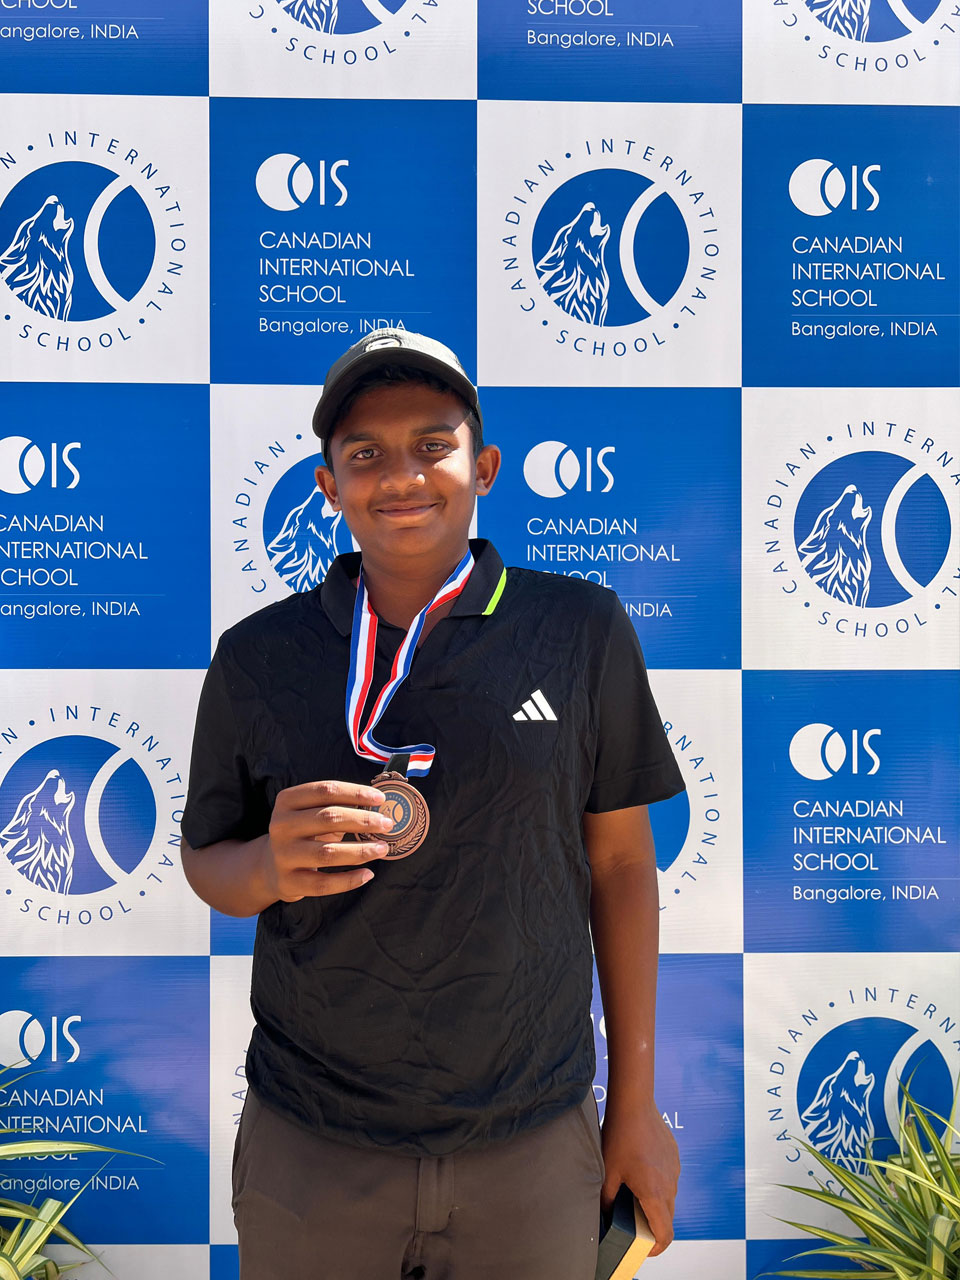 Vivaan Ubhayakar finished 3rd in the 'B' Boys category at the CIS interschool Golf Championship held at Prestige Augusta Golf Village in Bangalore.